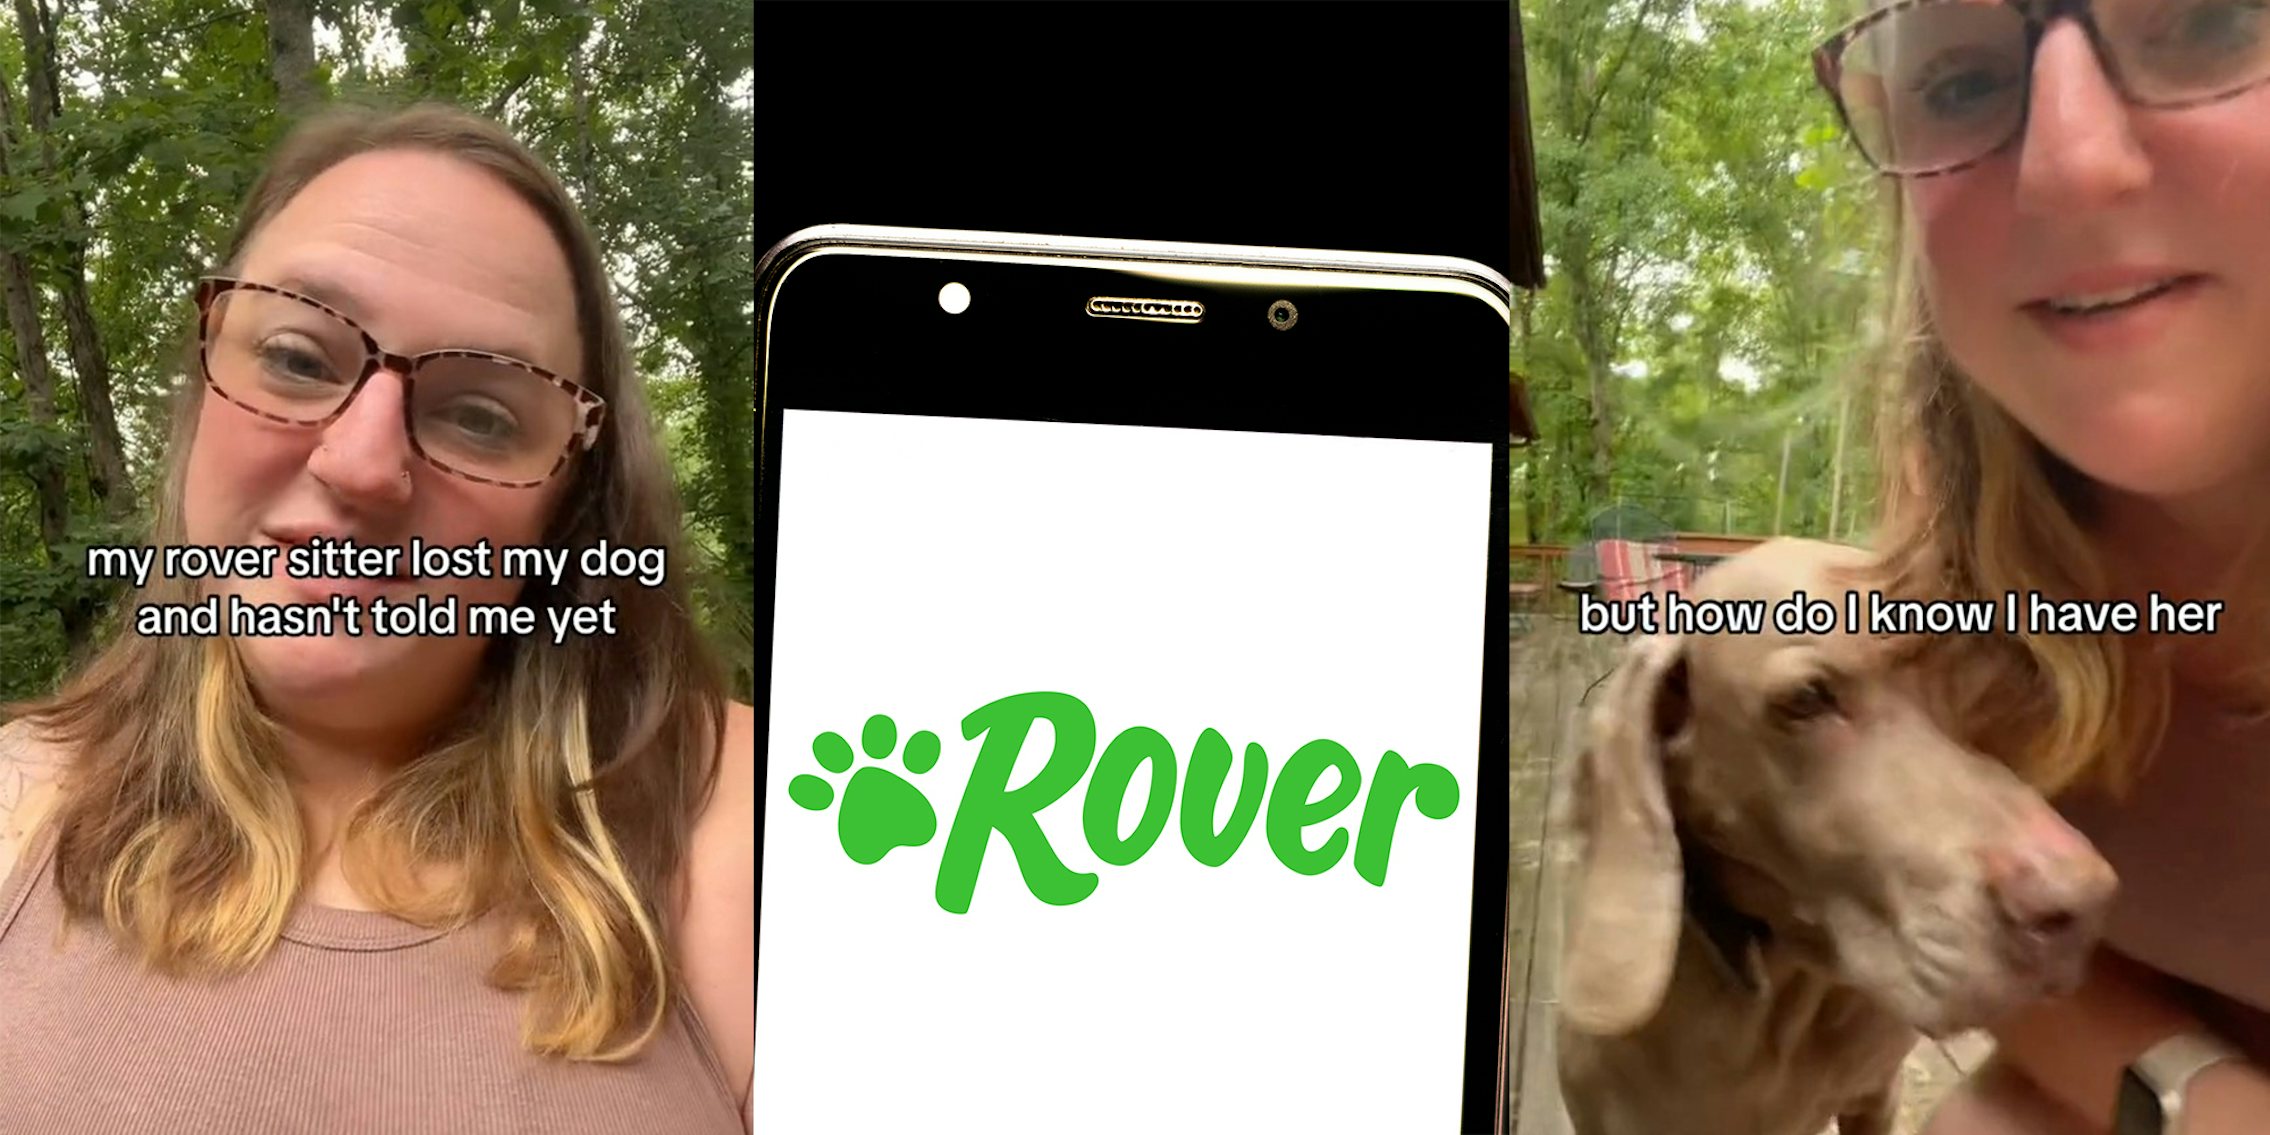 Customer says Rover sitter lost her dog and didn't tell her